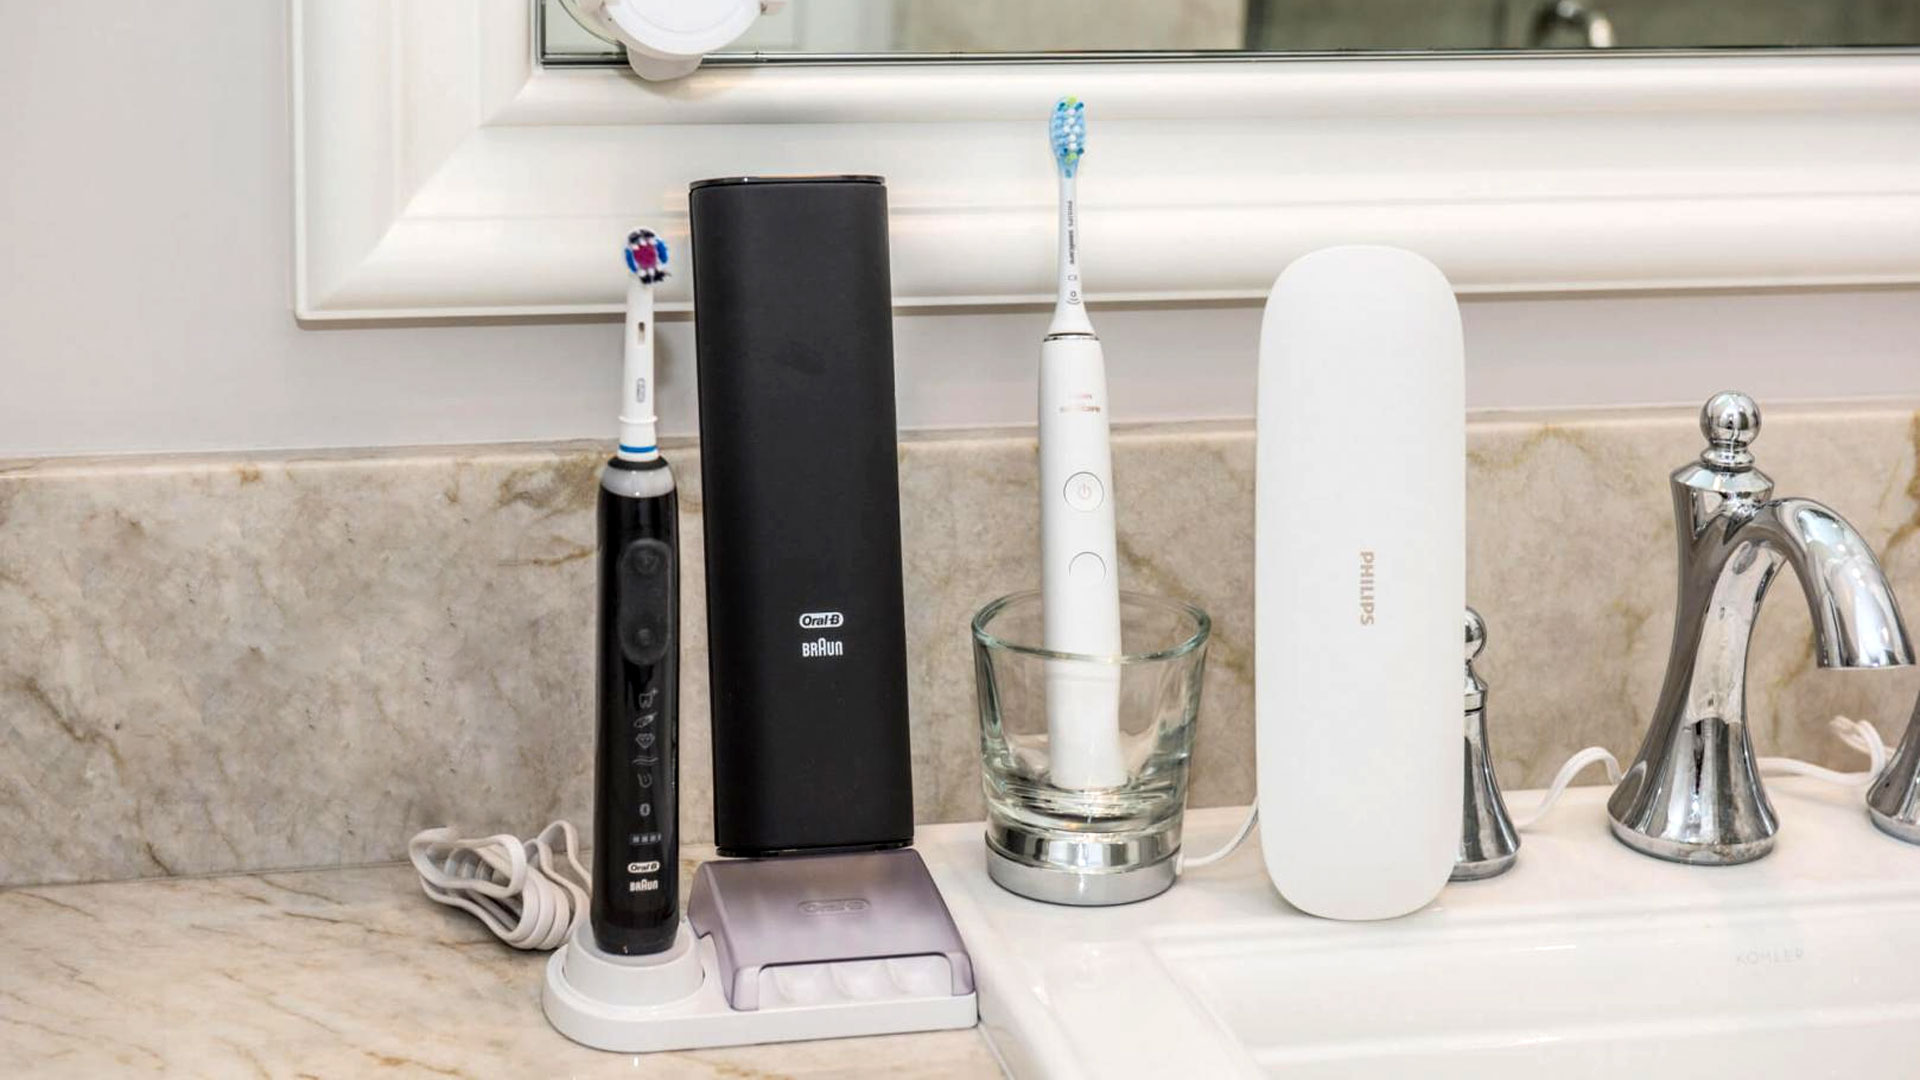 Ugly electric toothbrush in bathroom